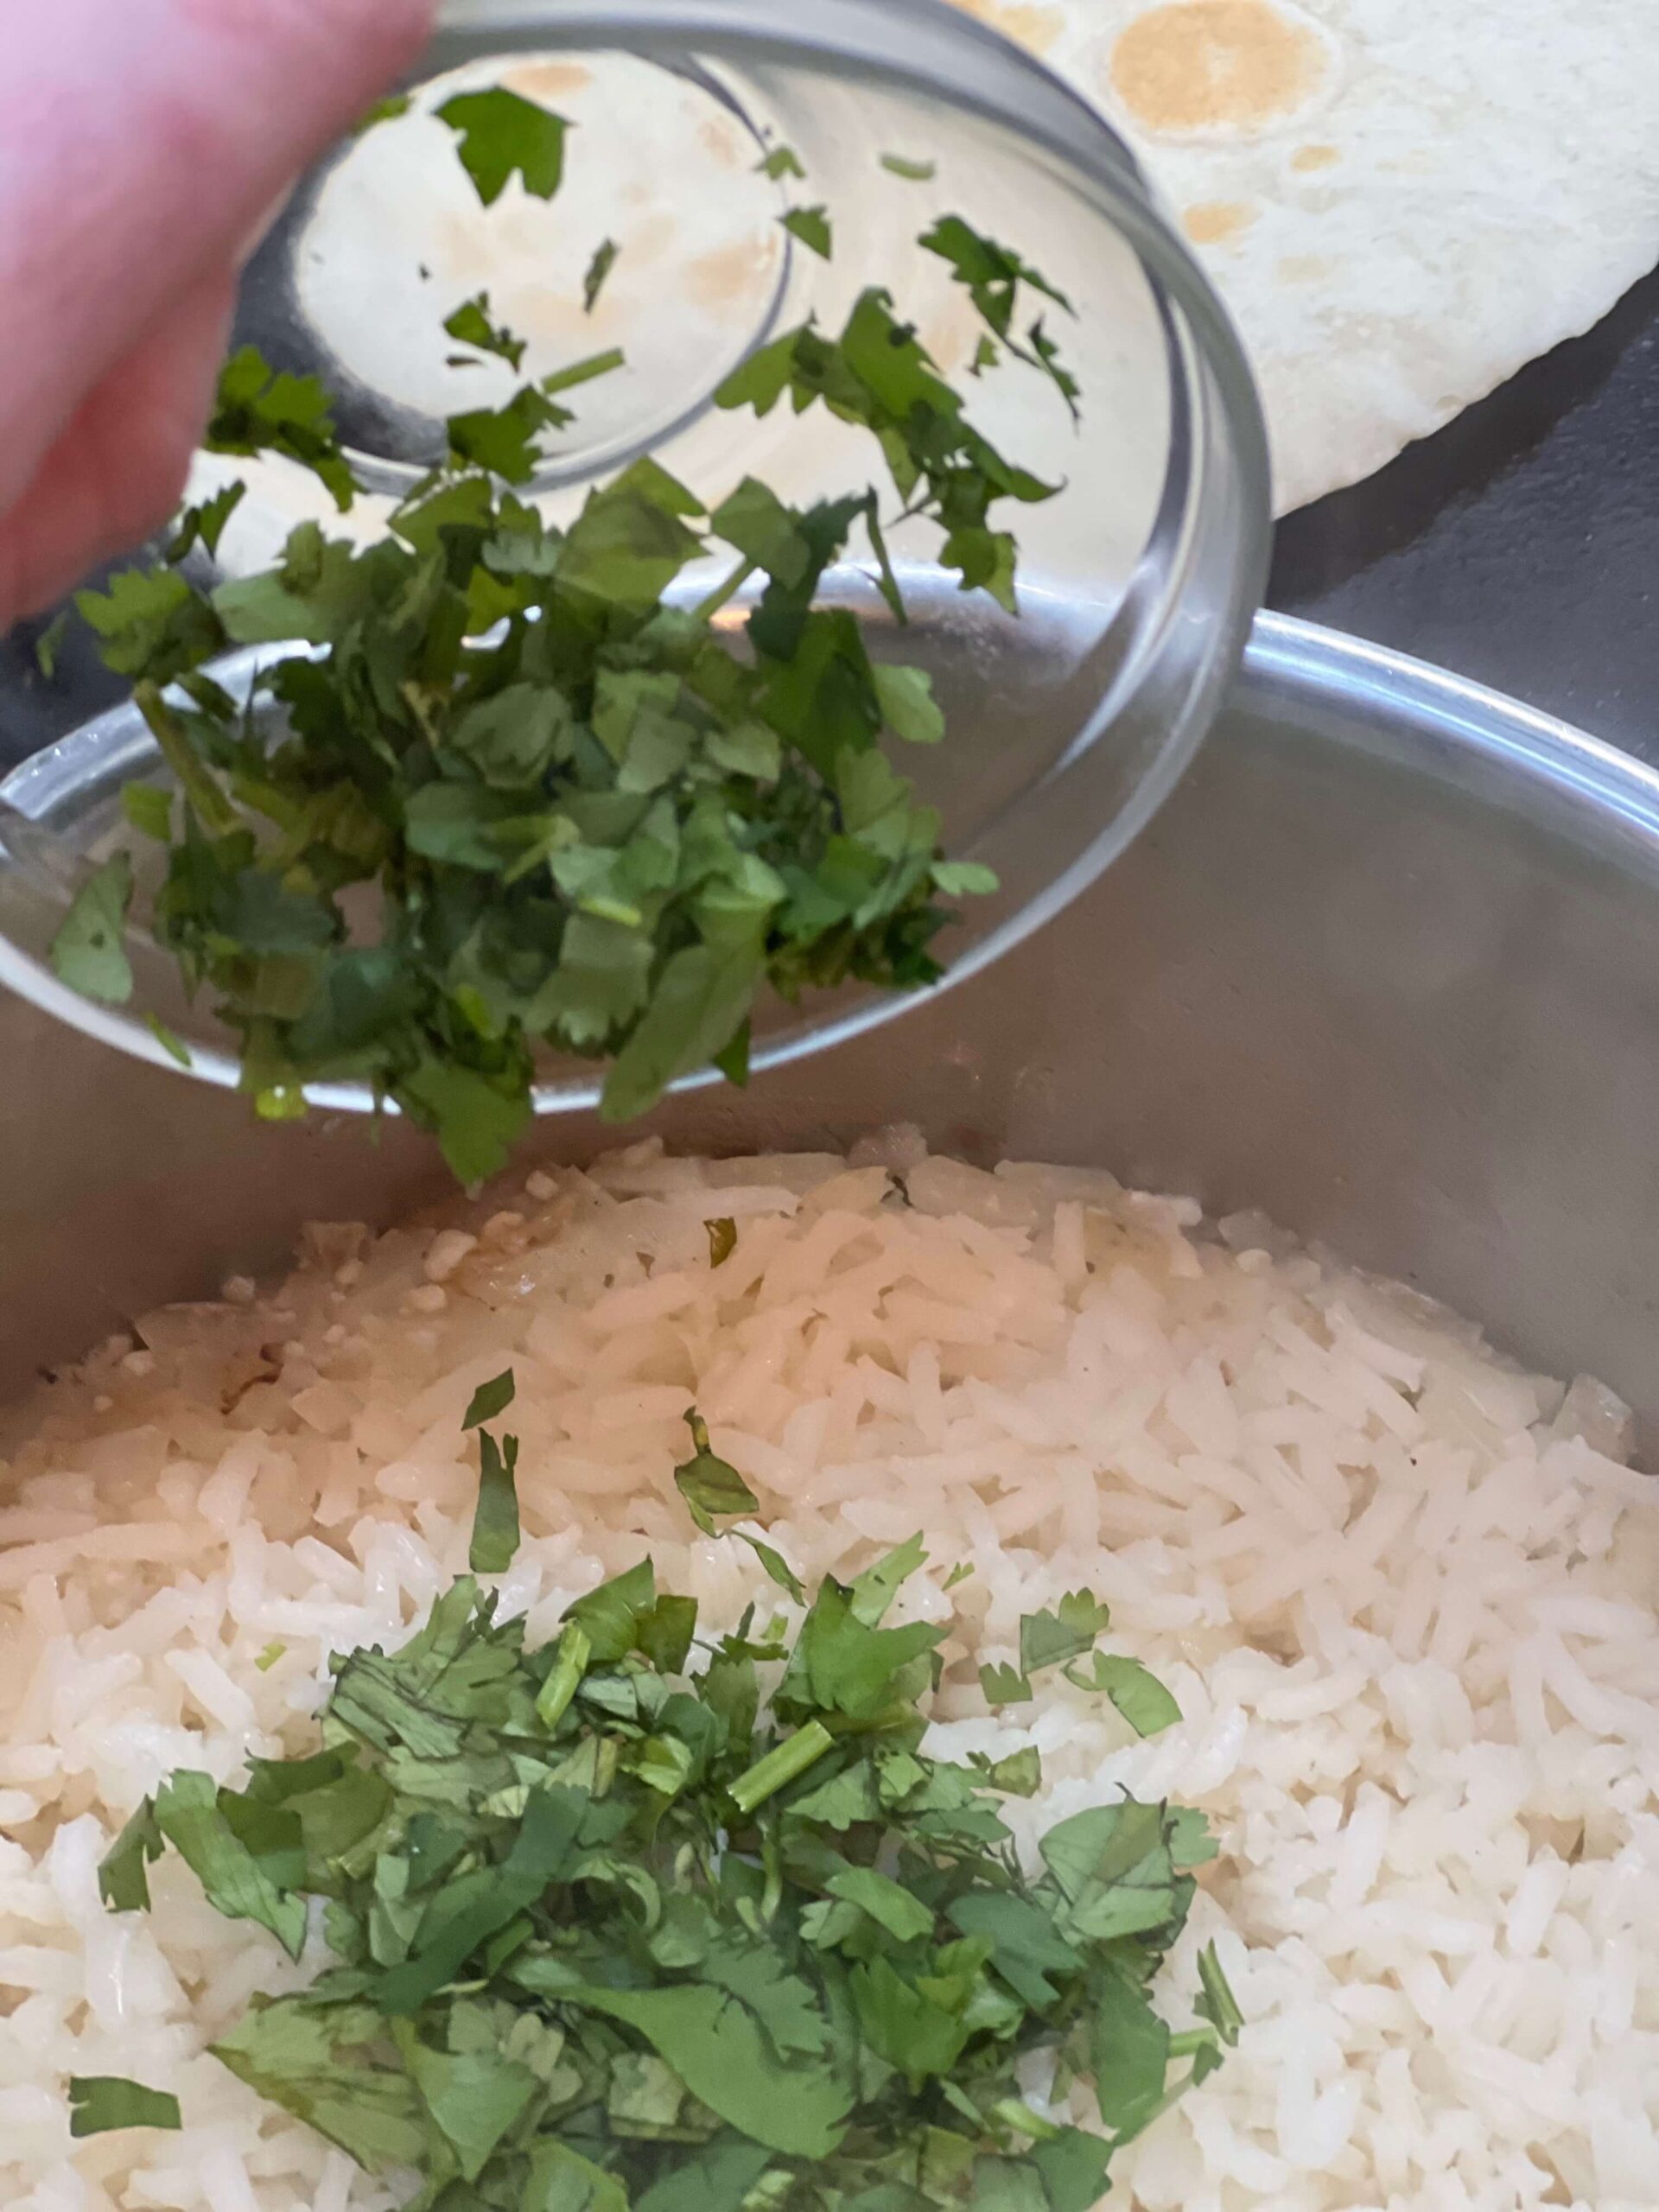 Add cilantro to cooked rice.